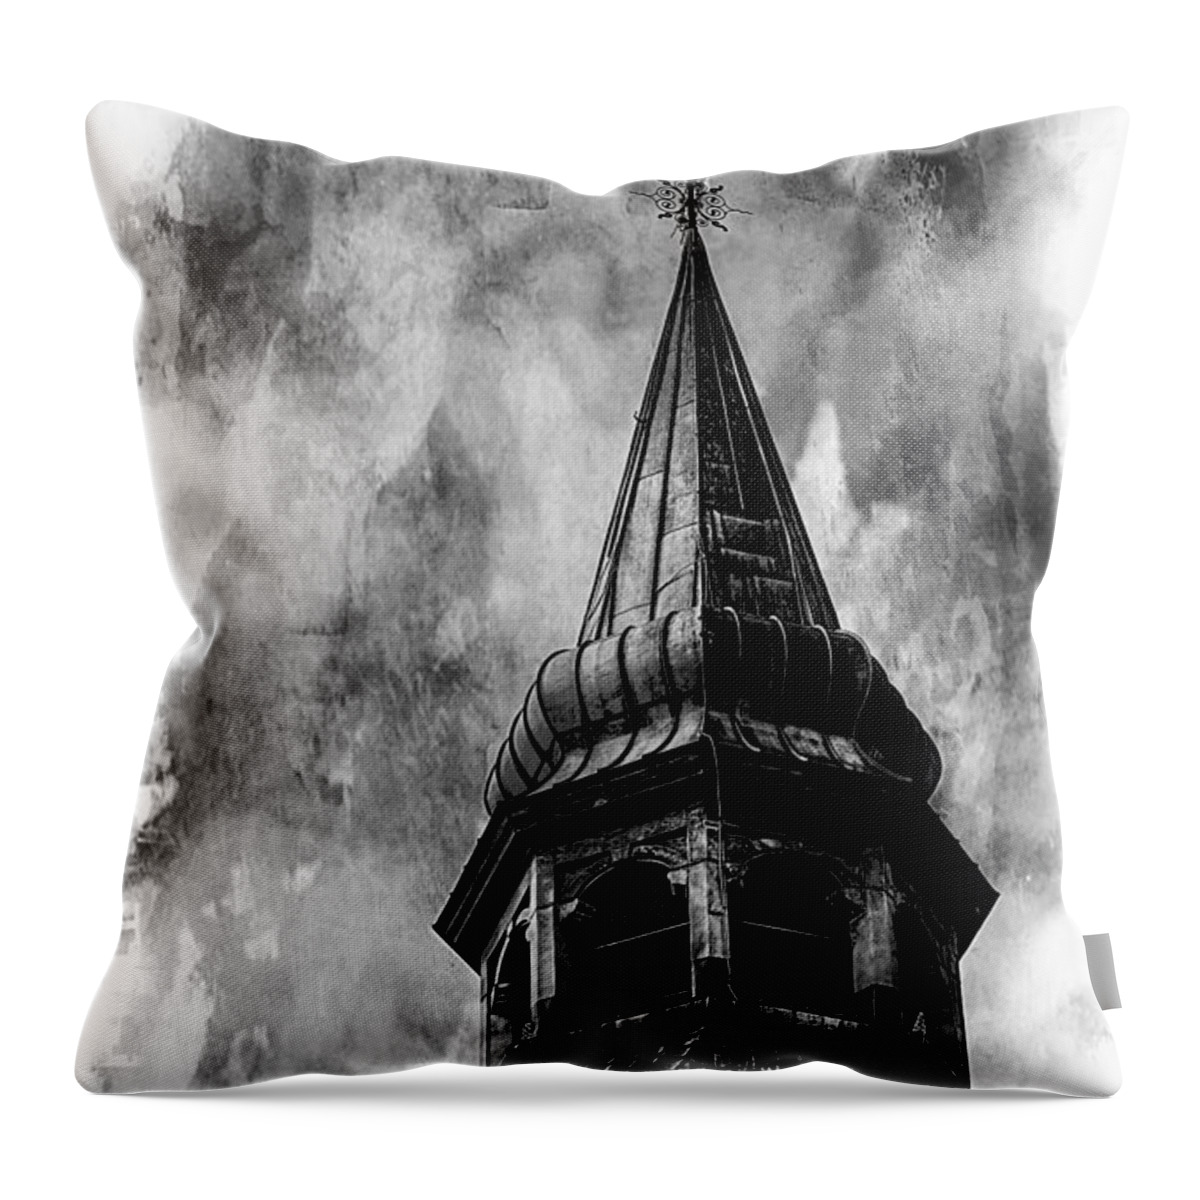 Black And White Photograph Throw Pillow featuring the photograph The Olde Tower by Karen McKenzie McAdoo